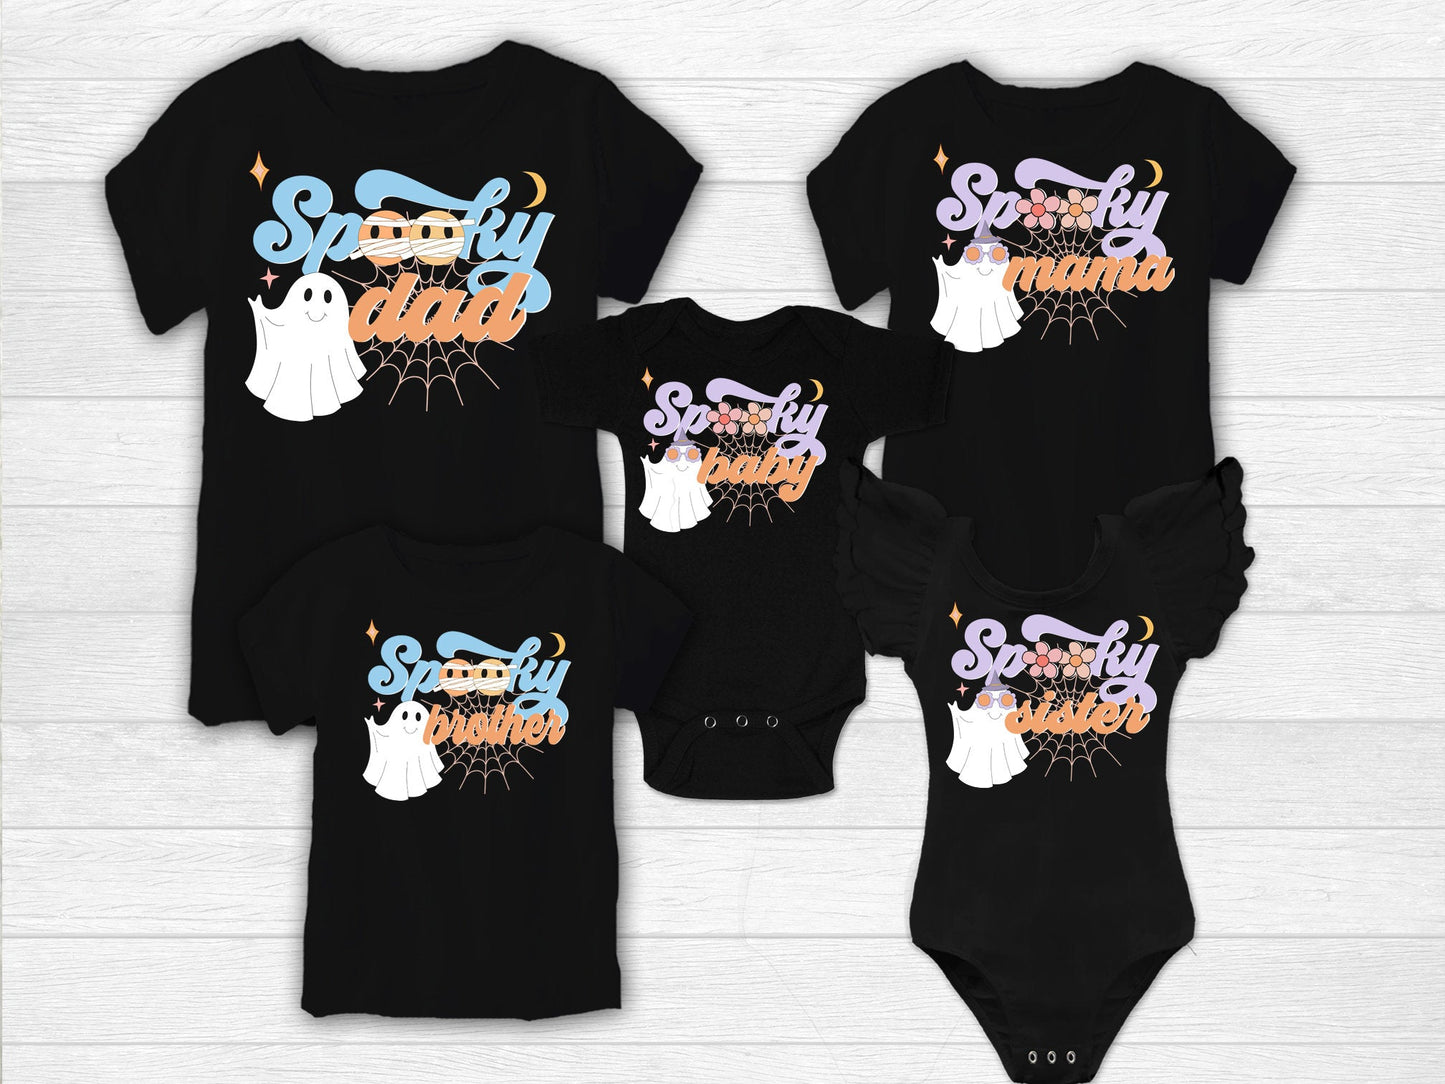 Spooky Family Halloween Shirts Spooky Ghost Tees Matching Mommy and Me Halloween Shirts Dad Mother and Kid Shirts - Squishy Cheeks